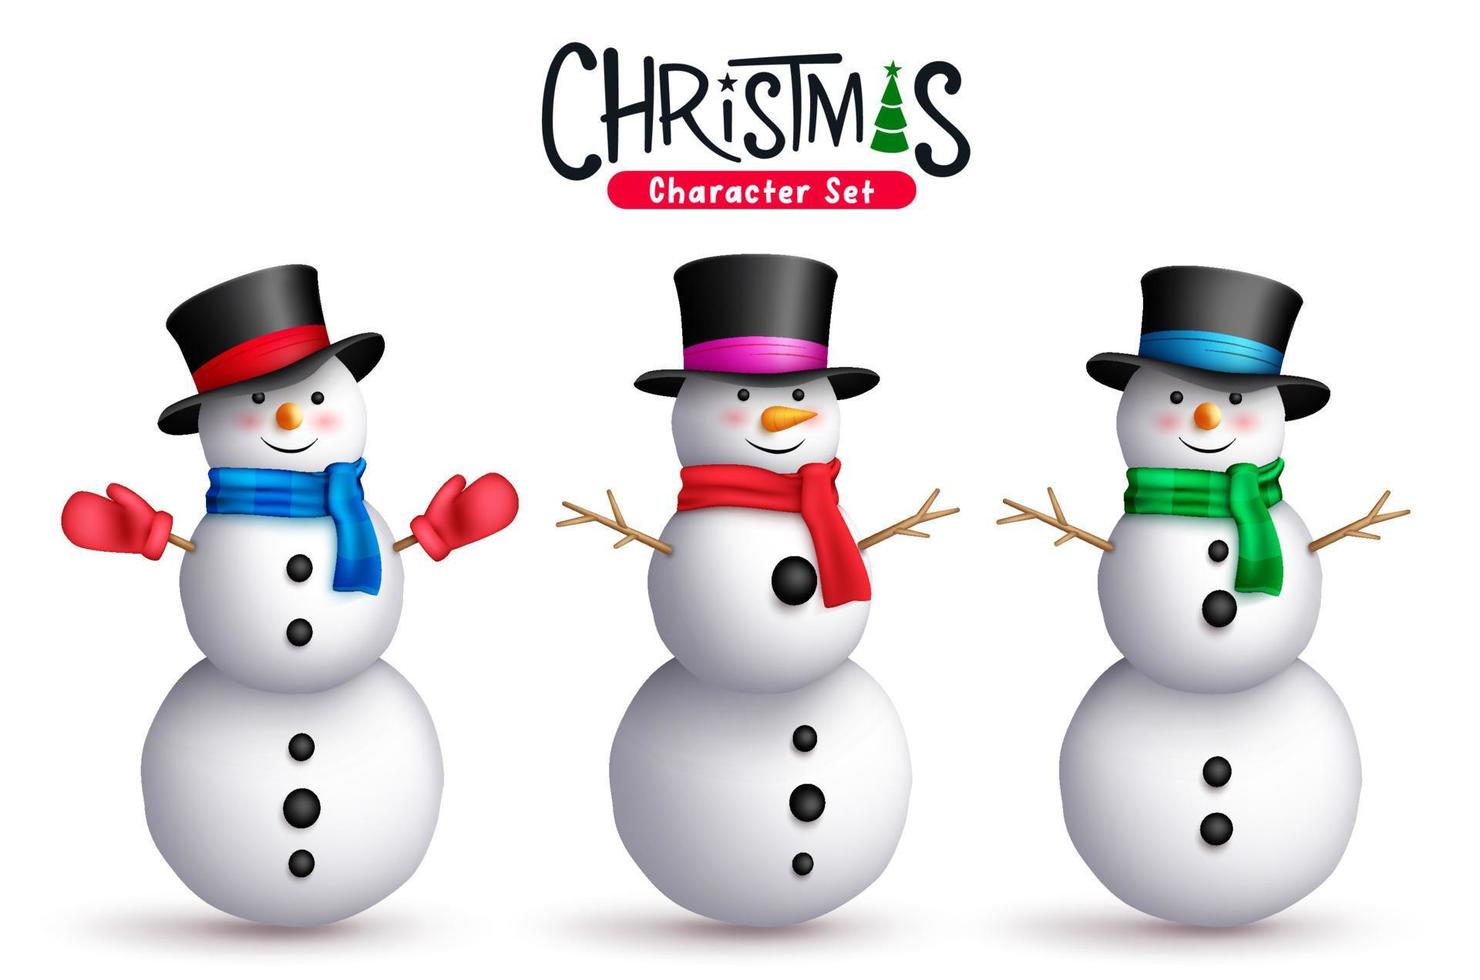 Snowman christmas character vector set. Snow man christmas 3d characters standing with scarf, hat and twig elements for xmas and winter graphic design collection. Vector illustration